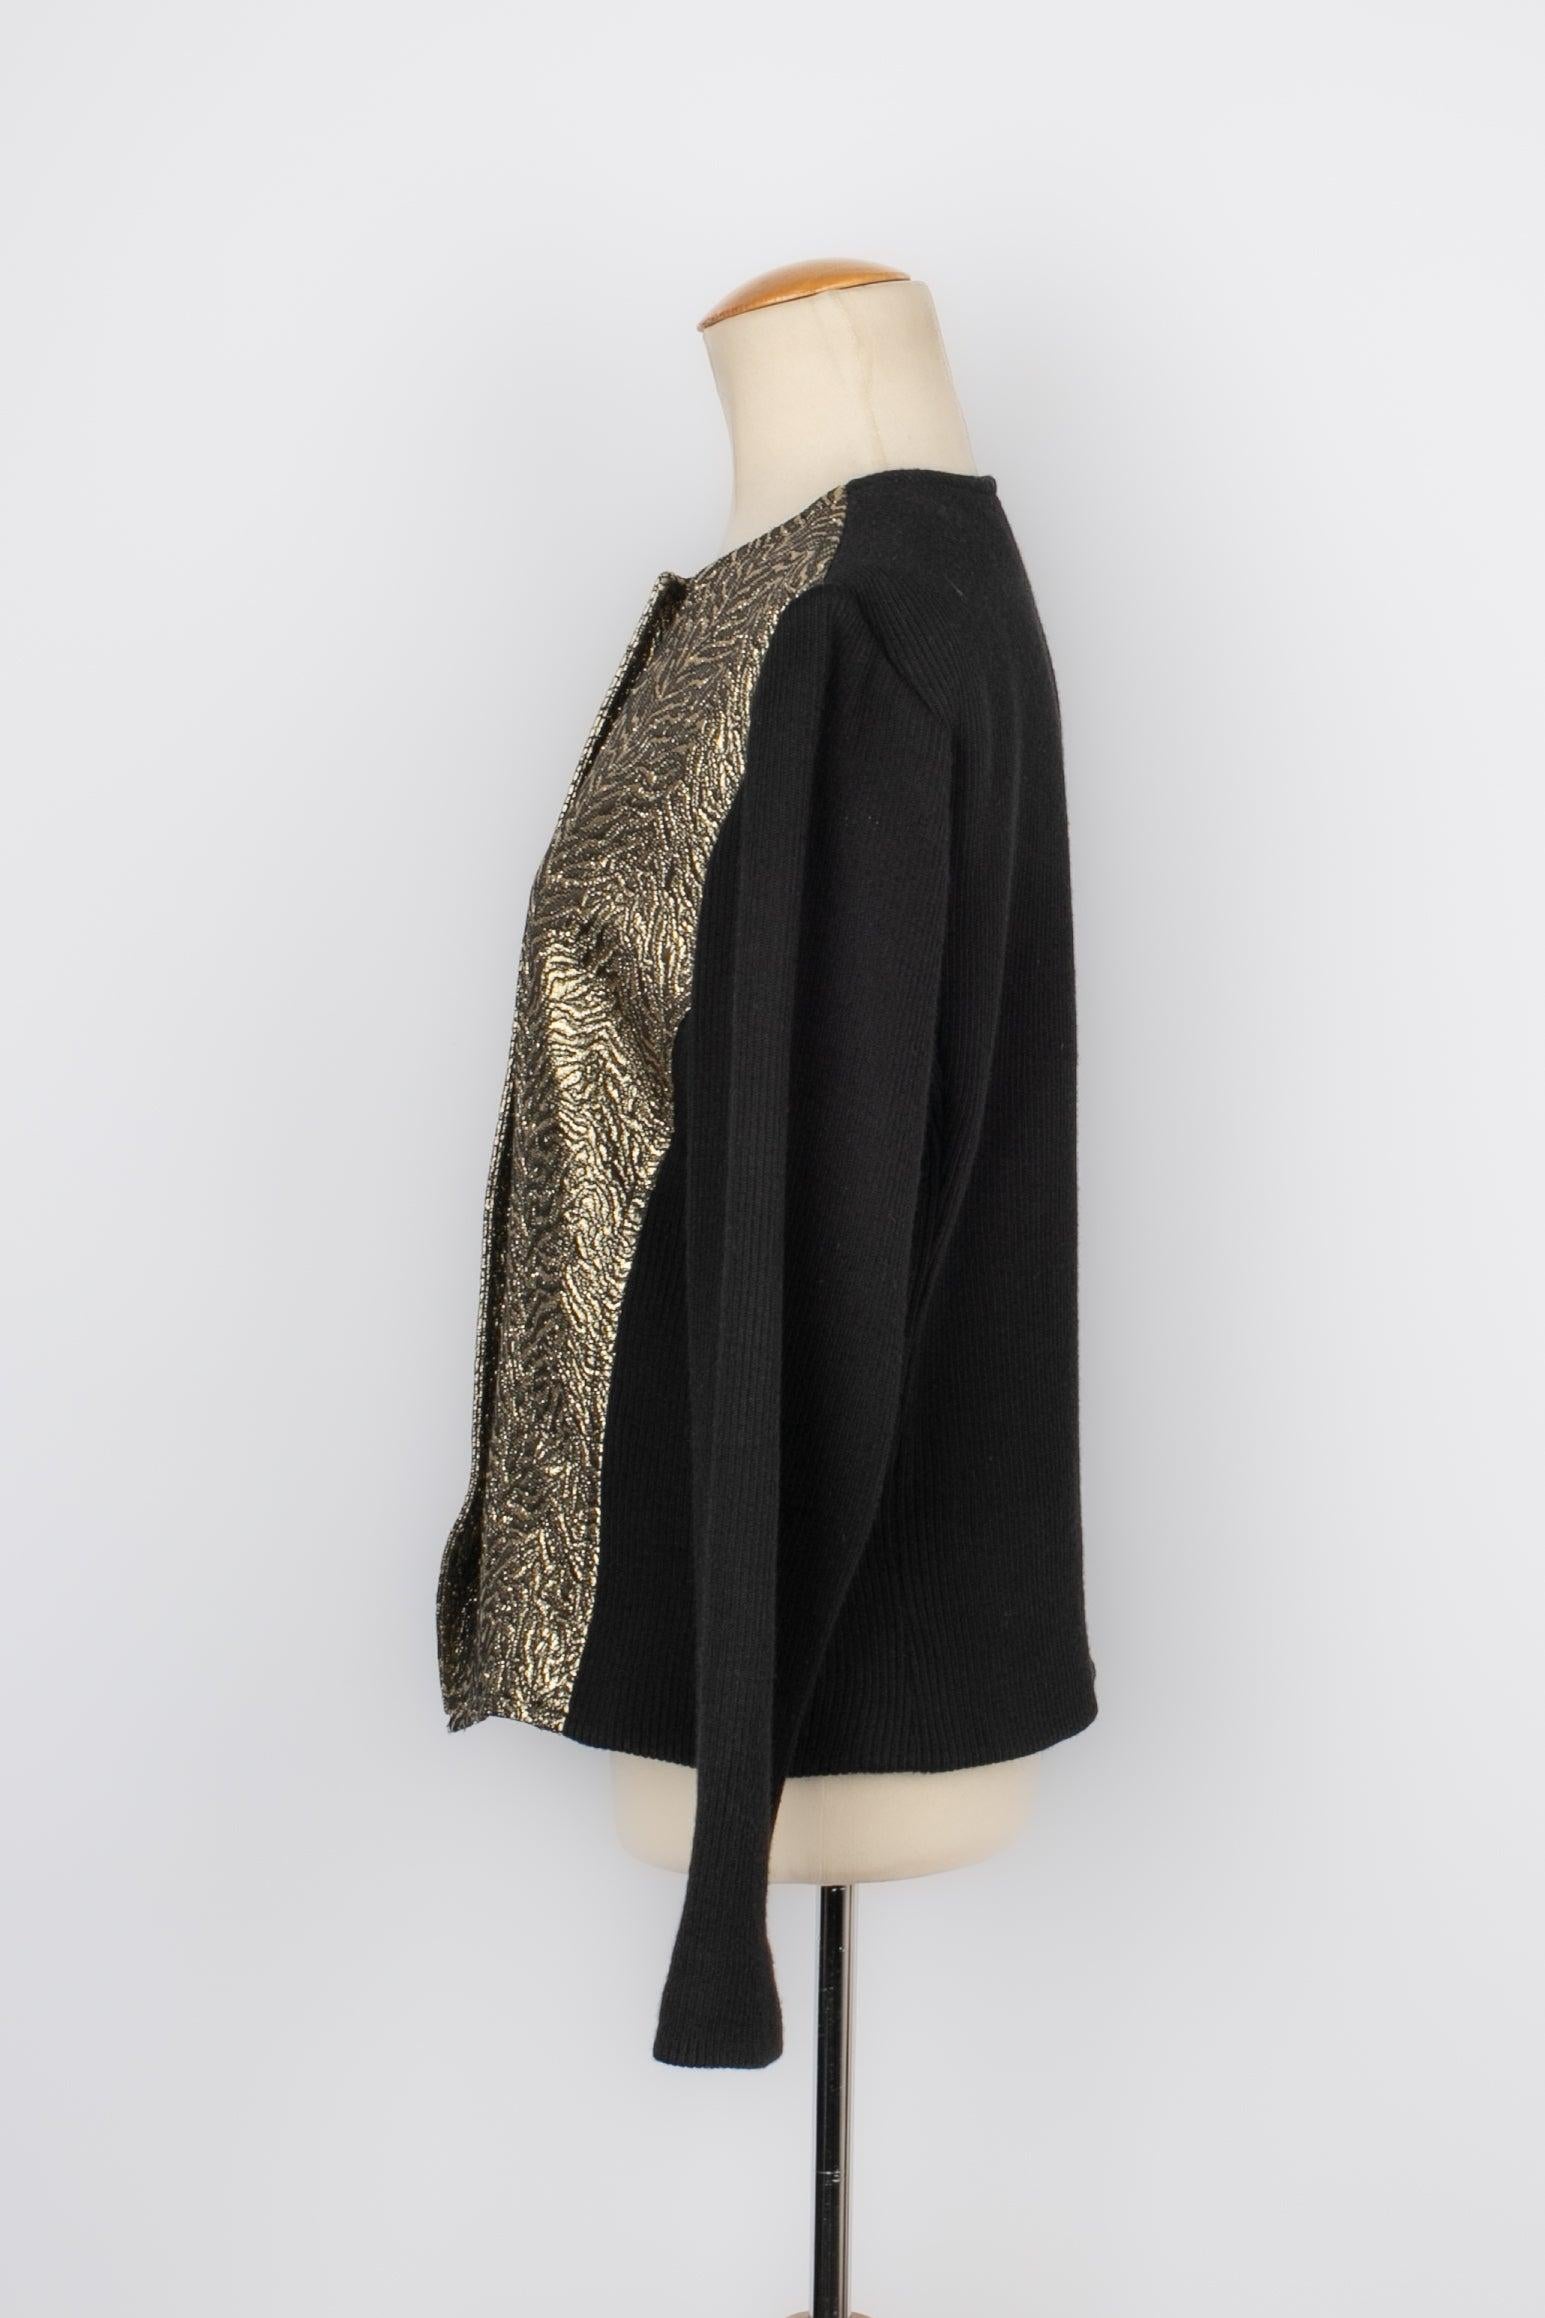 Women's Yves Saint Laurent Black Wool and Gold Lurex Jacket, 1980s For Sale